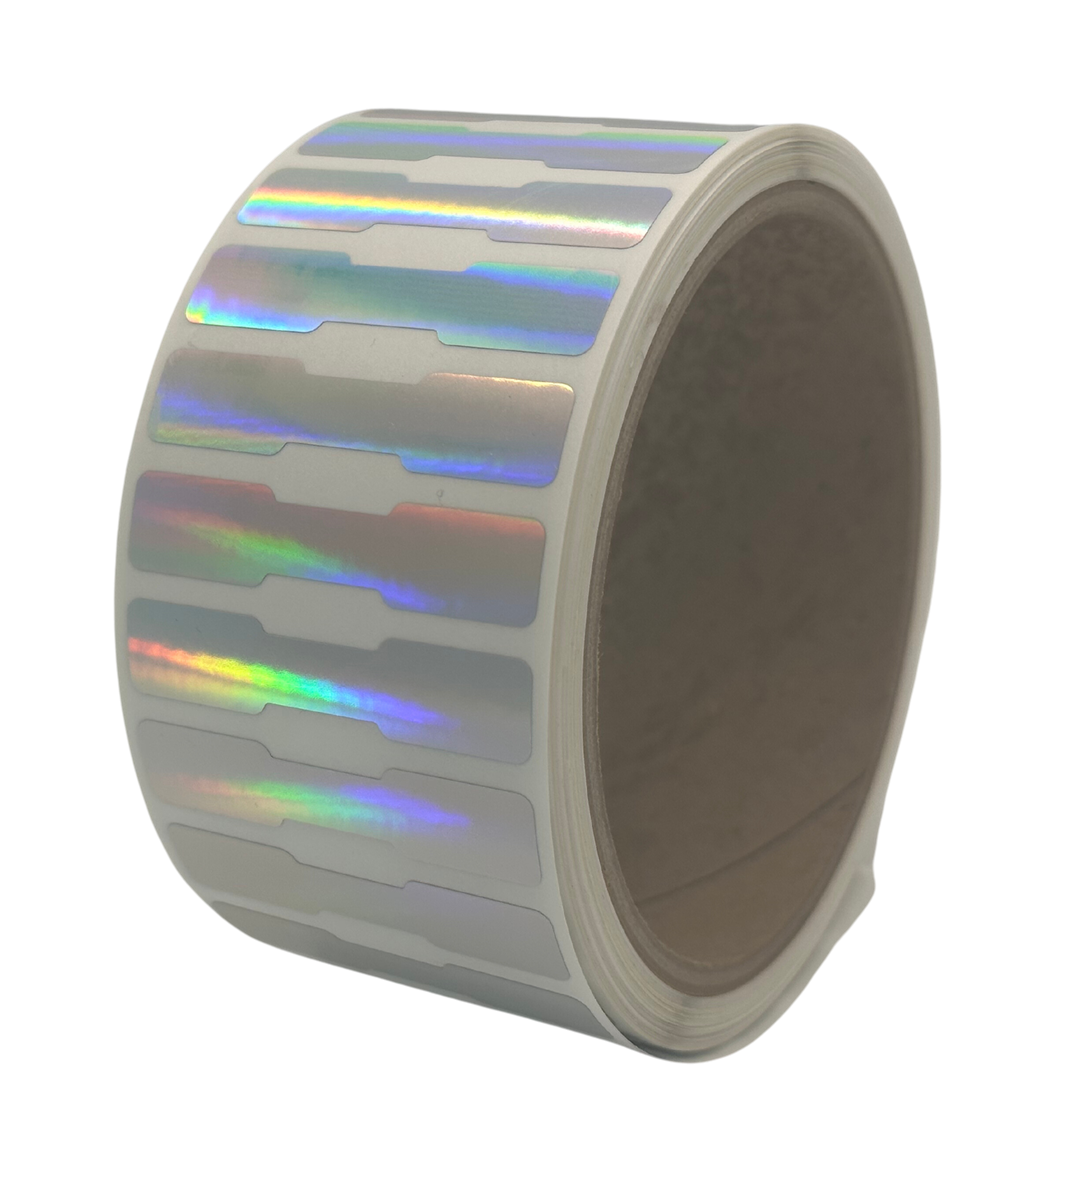 1,000 Rainbow Tamper-Evident Security Labels TamperColor® Seal Stickers, Dogbone Shape Size 1.75" x 0.375 (44mm x 9mm).